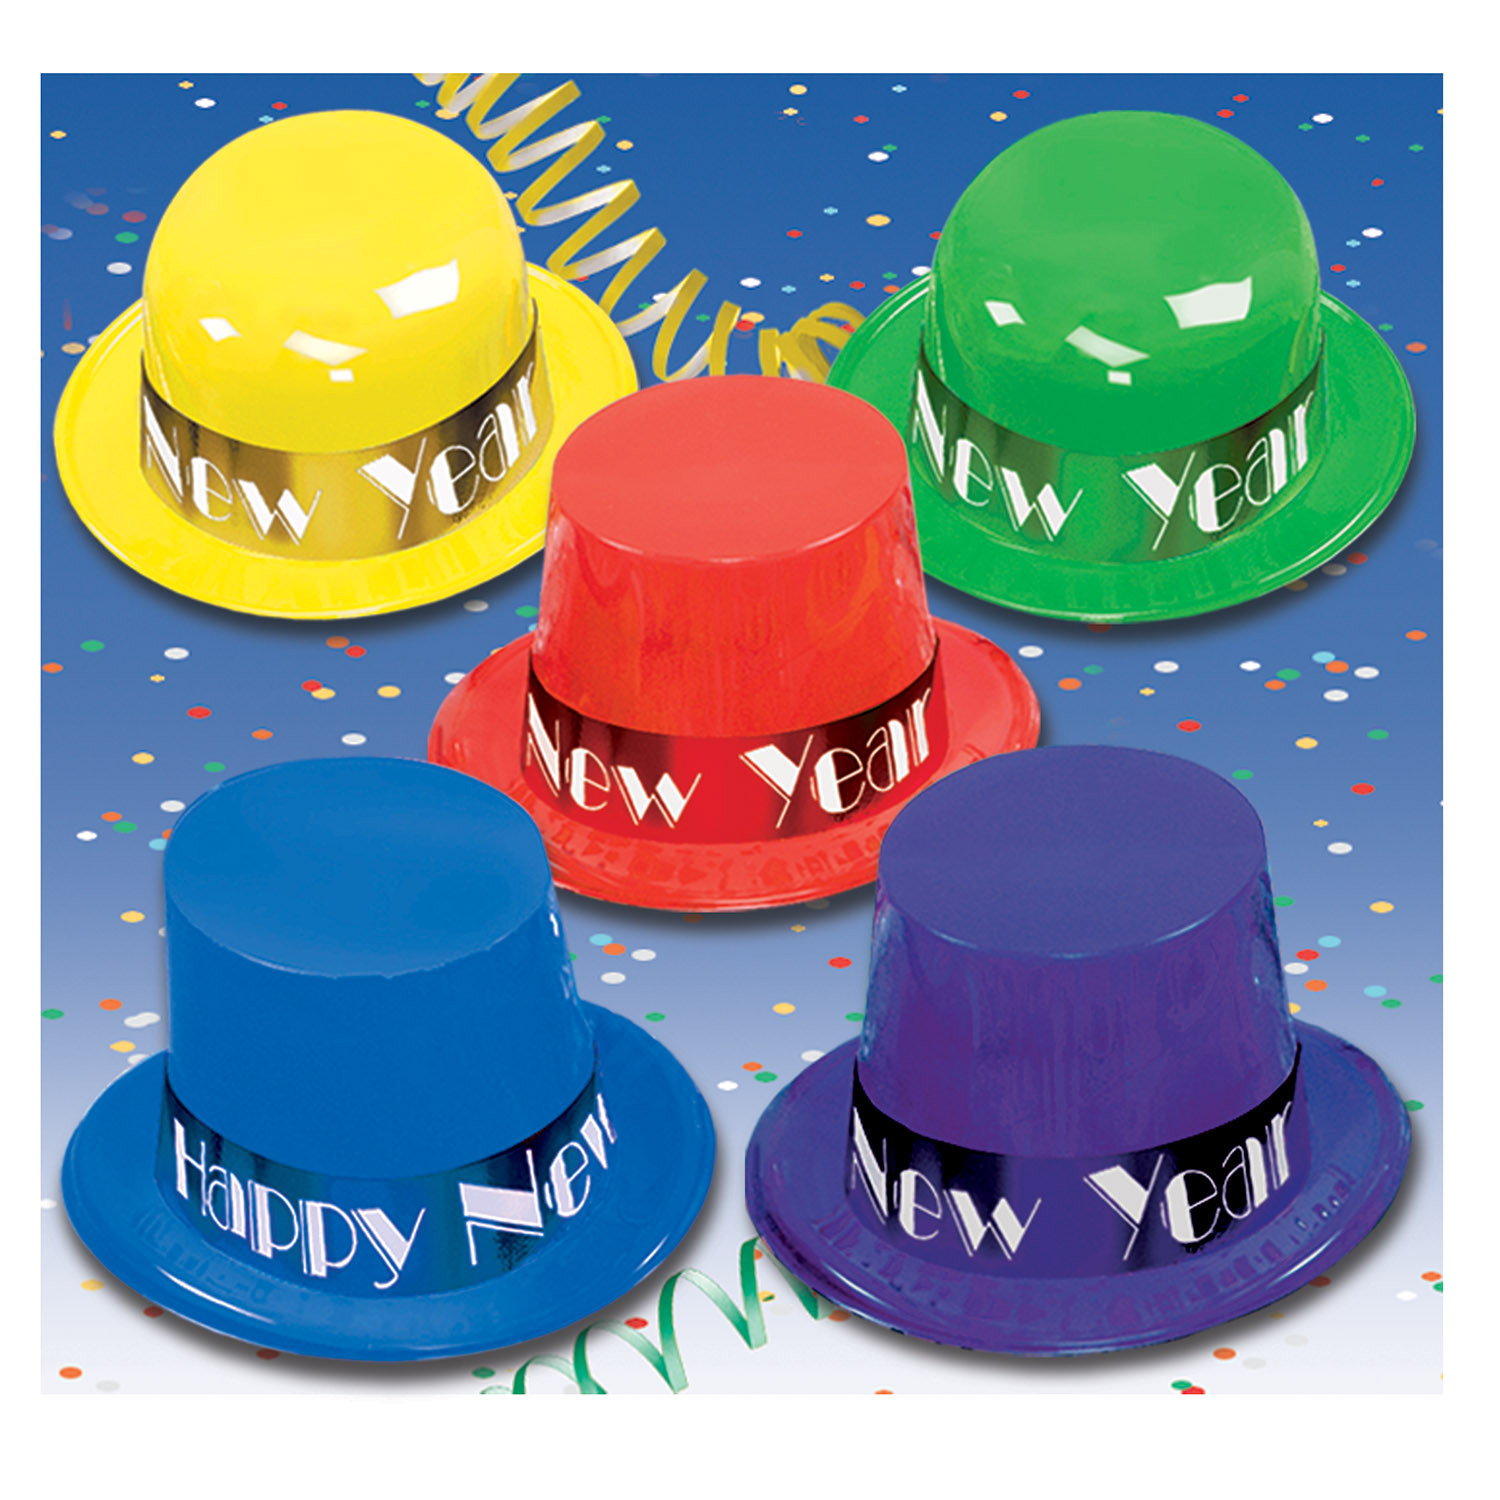 Plastic toppers and derbies in colors of blue, green, purple , red and yellow with bands that reads "Happy New Year" in white.